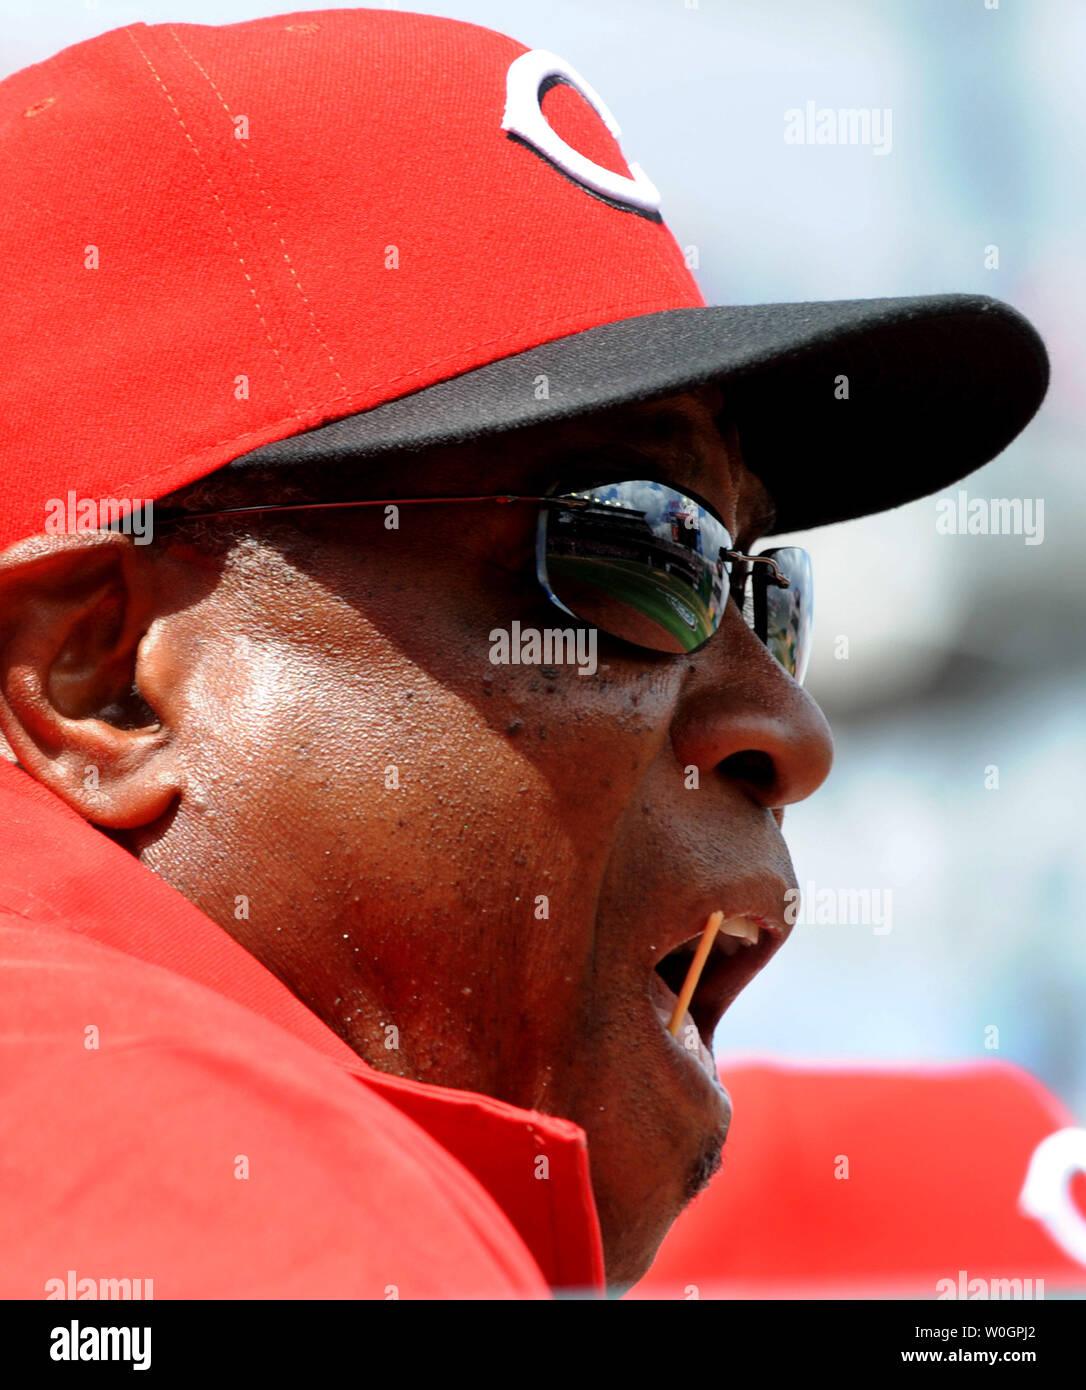 https://c8.alamy.com/comp/W0GPJ2/cincinnati-reds-manager-dusty-baker-has-his-trusty-toothpick-as-he-watches-first-inning-action-from-the-dugout-at-nationals-park-against-the-washington-nationals-on-april-12-2012-in-washington-dc-it-was-opening-day-for-the-nationals-at-home-as-they-played-host-to-the-cincinnati-reds-upipat-benic-W0GPJ2.jpg